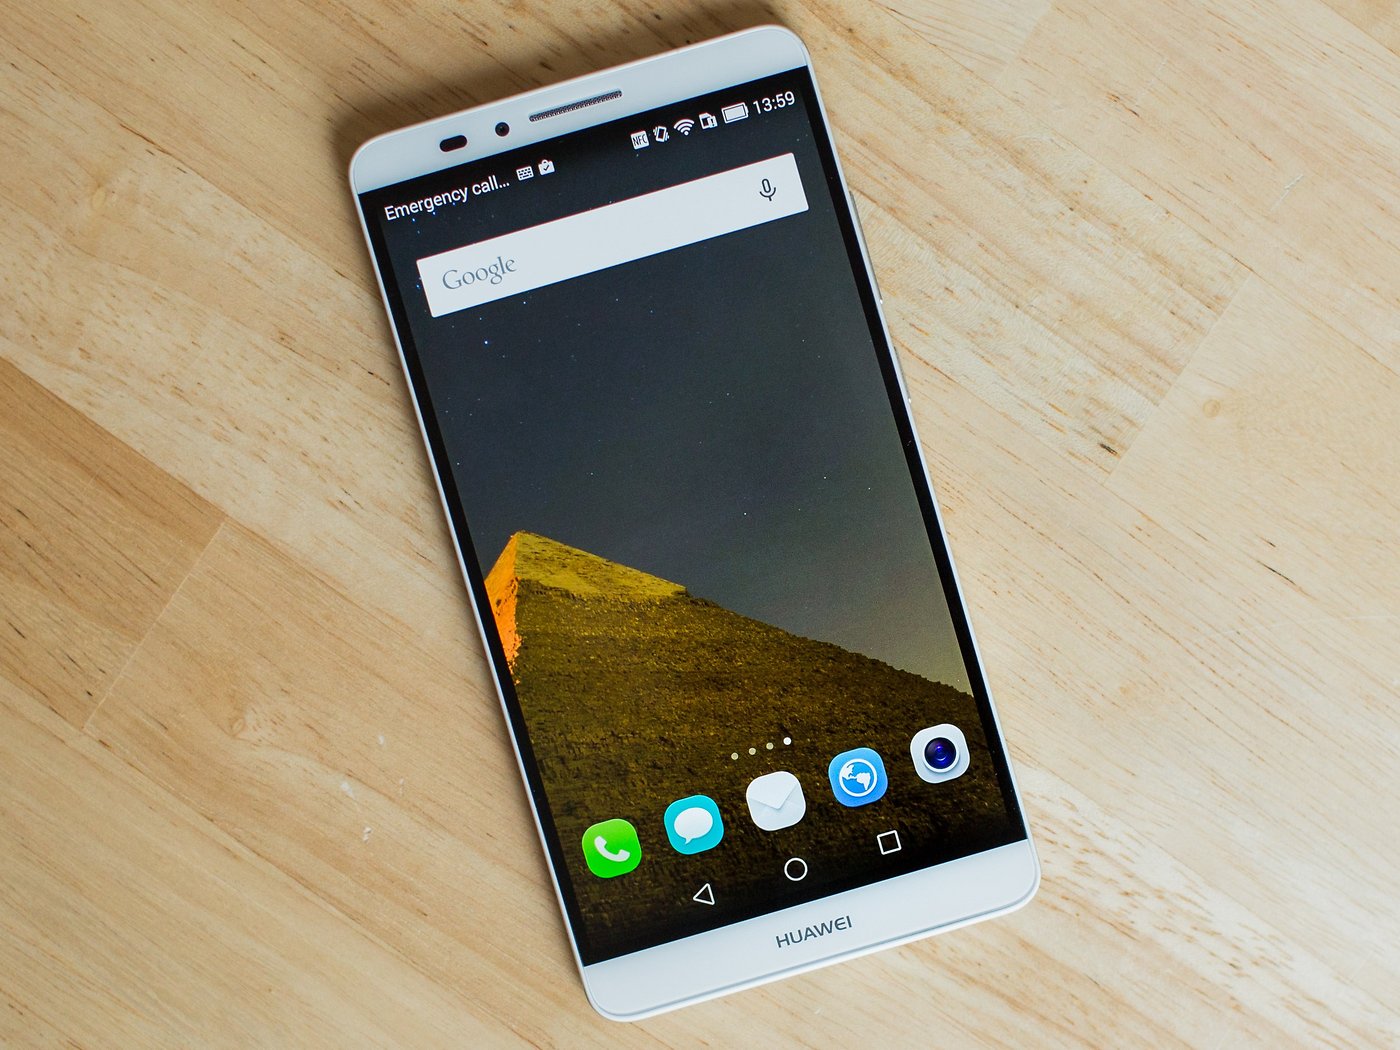 Wacht even Ladder Dusver Huawei Ascend Mate 7 review: the best finger scanner on Android | NextPit